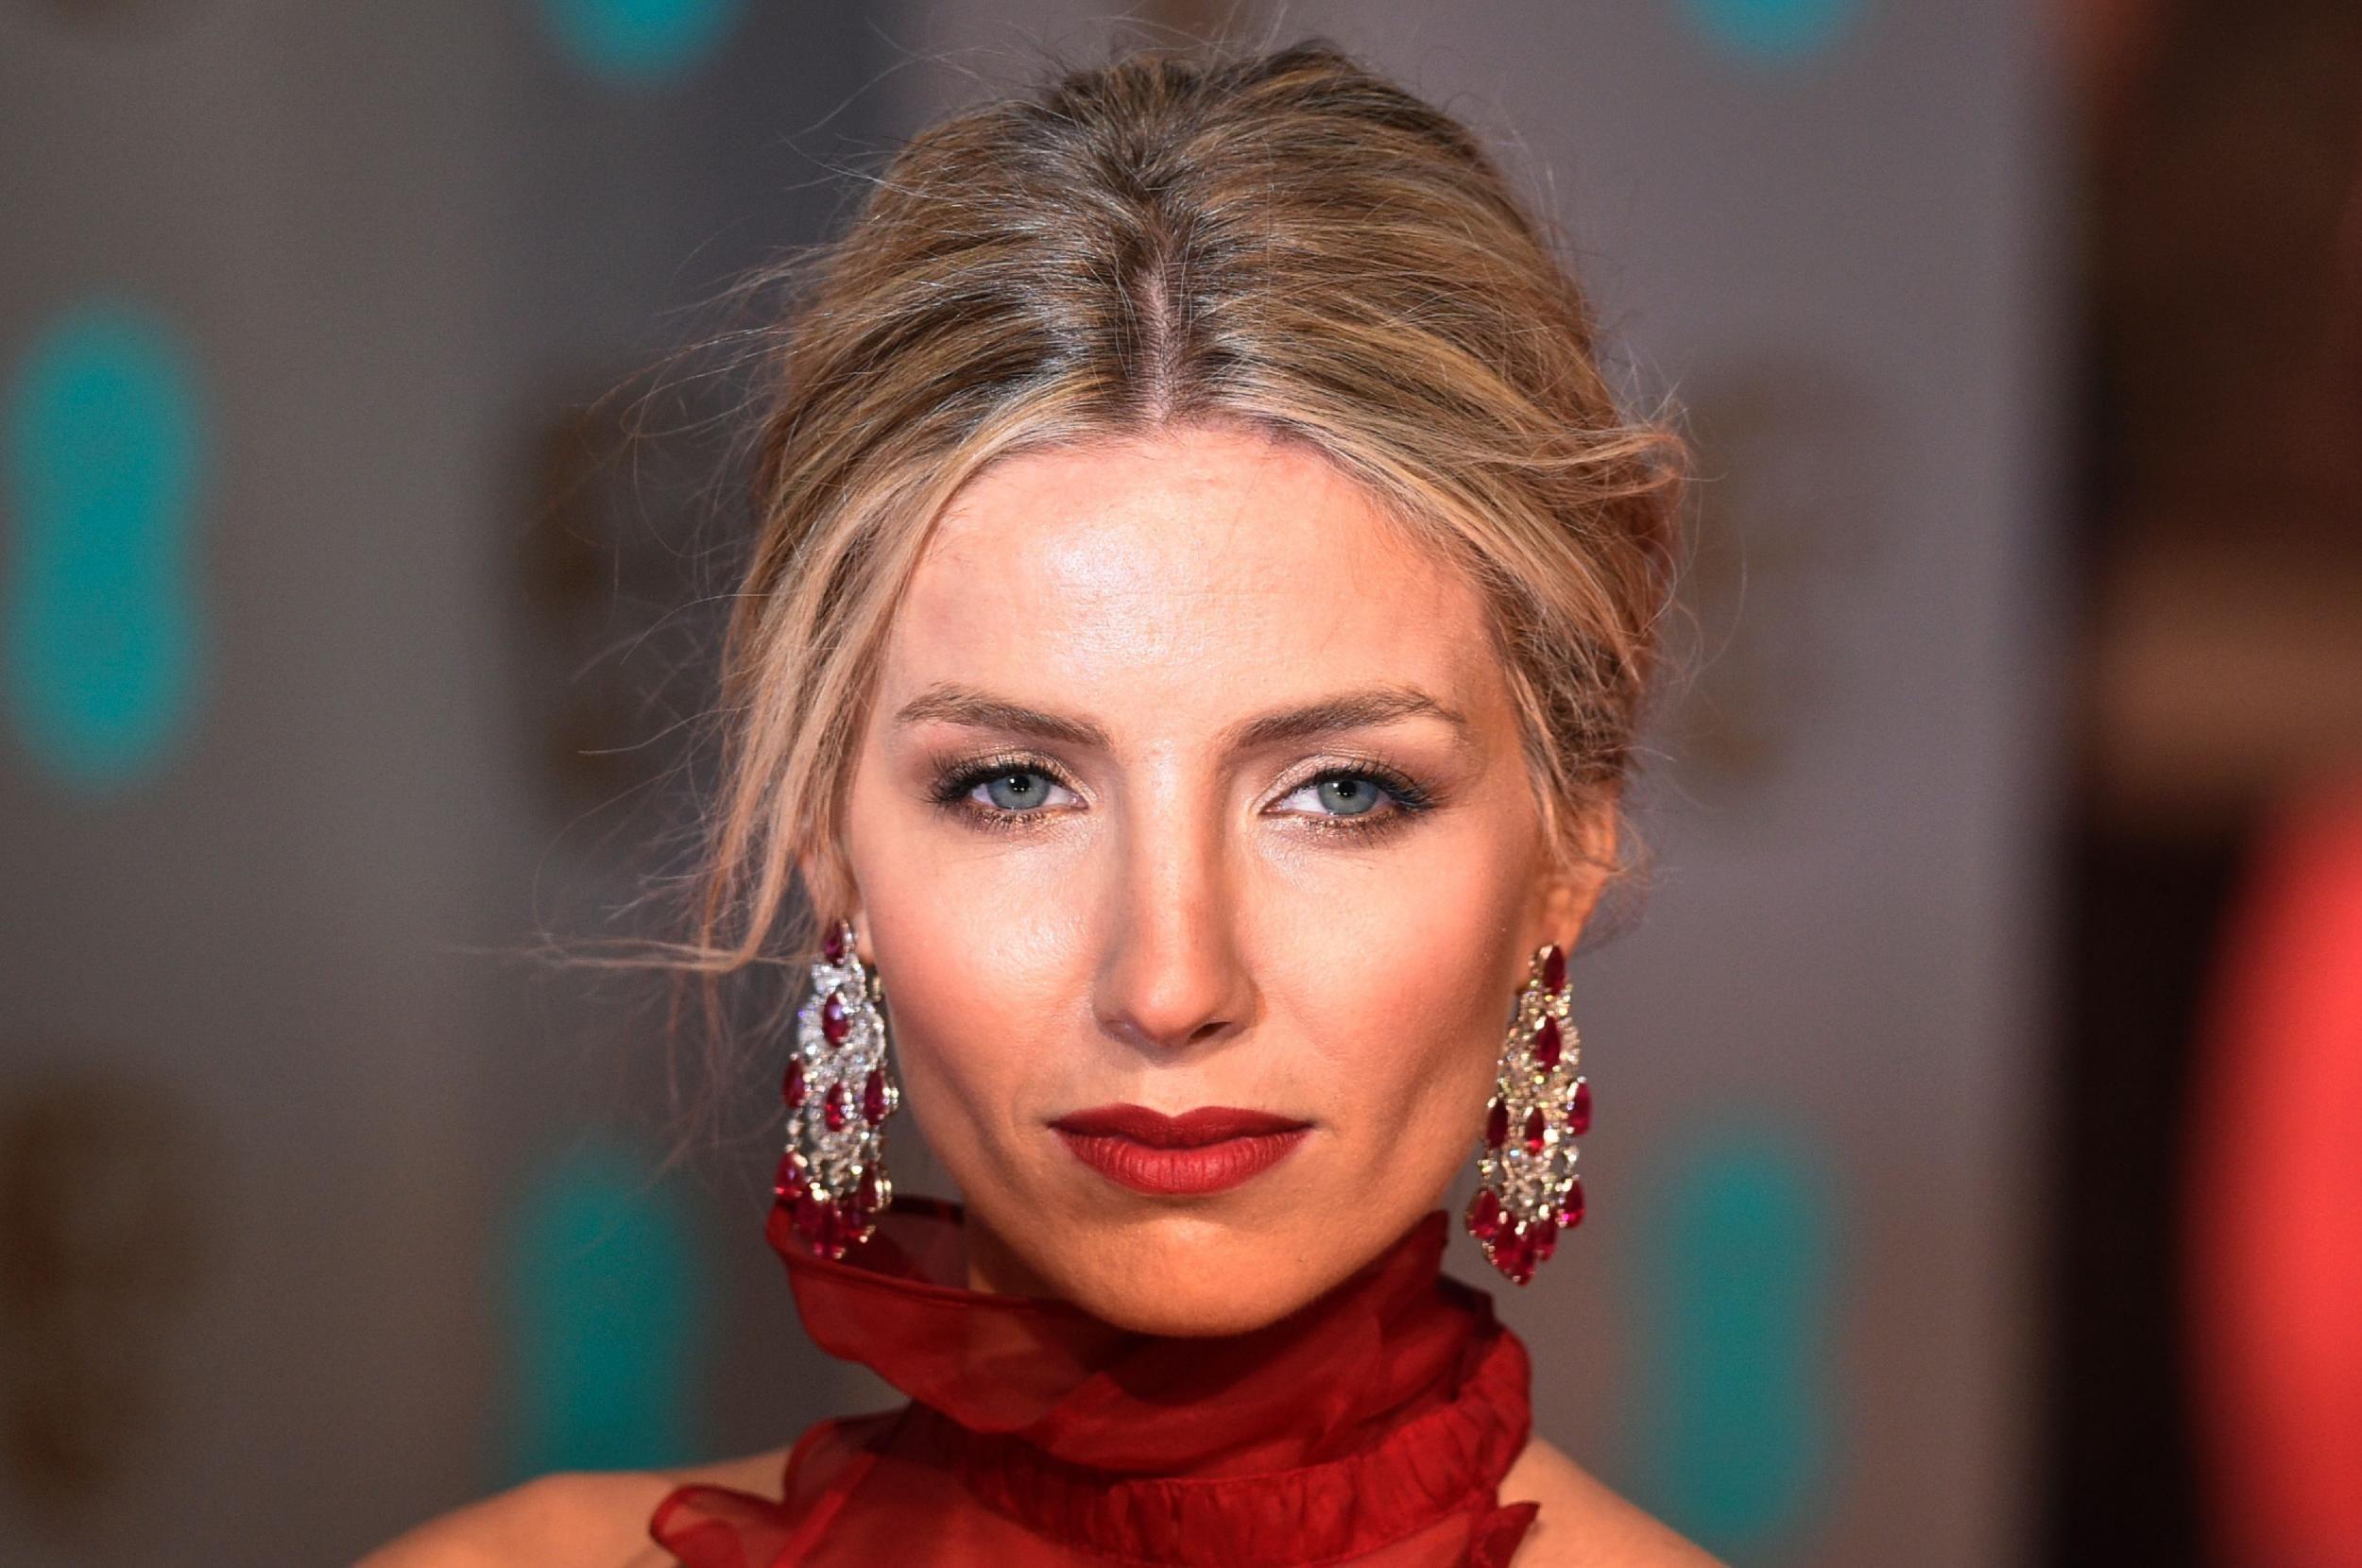 Peaky Blinders' Annabelle Wallis to star in Tom Cruise's The Mummy